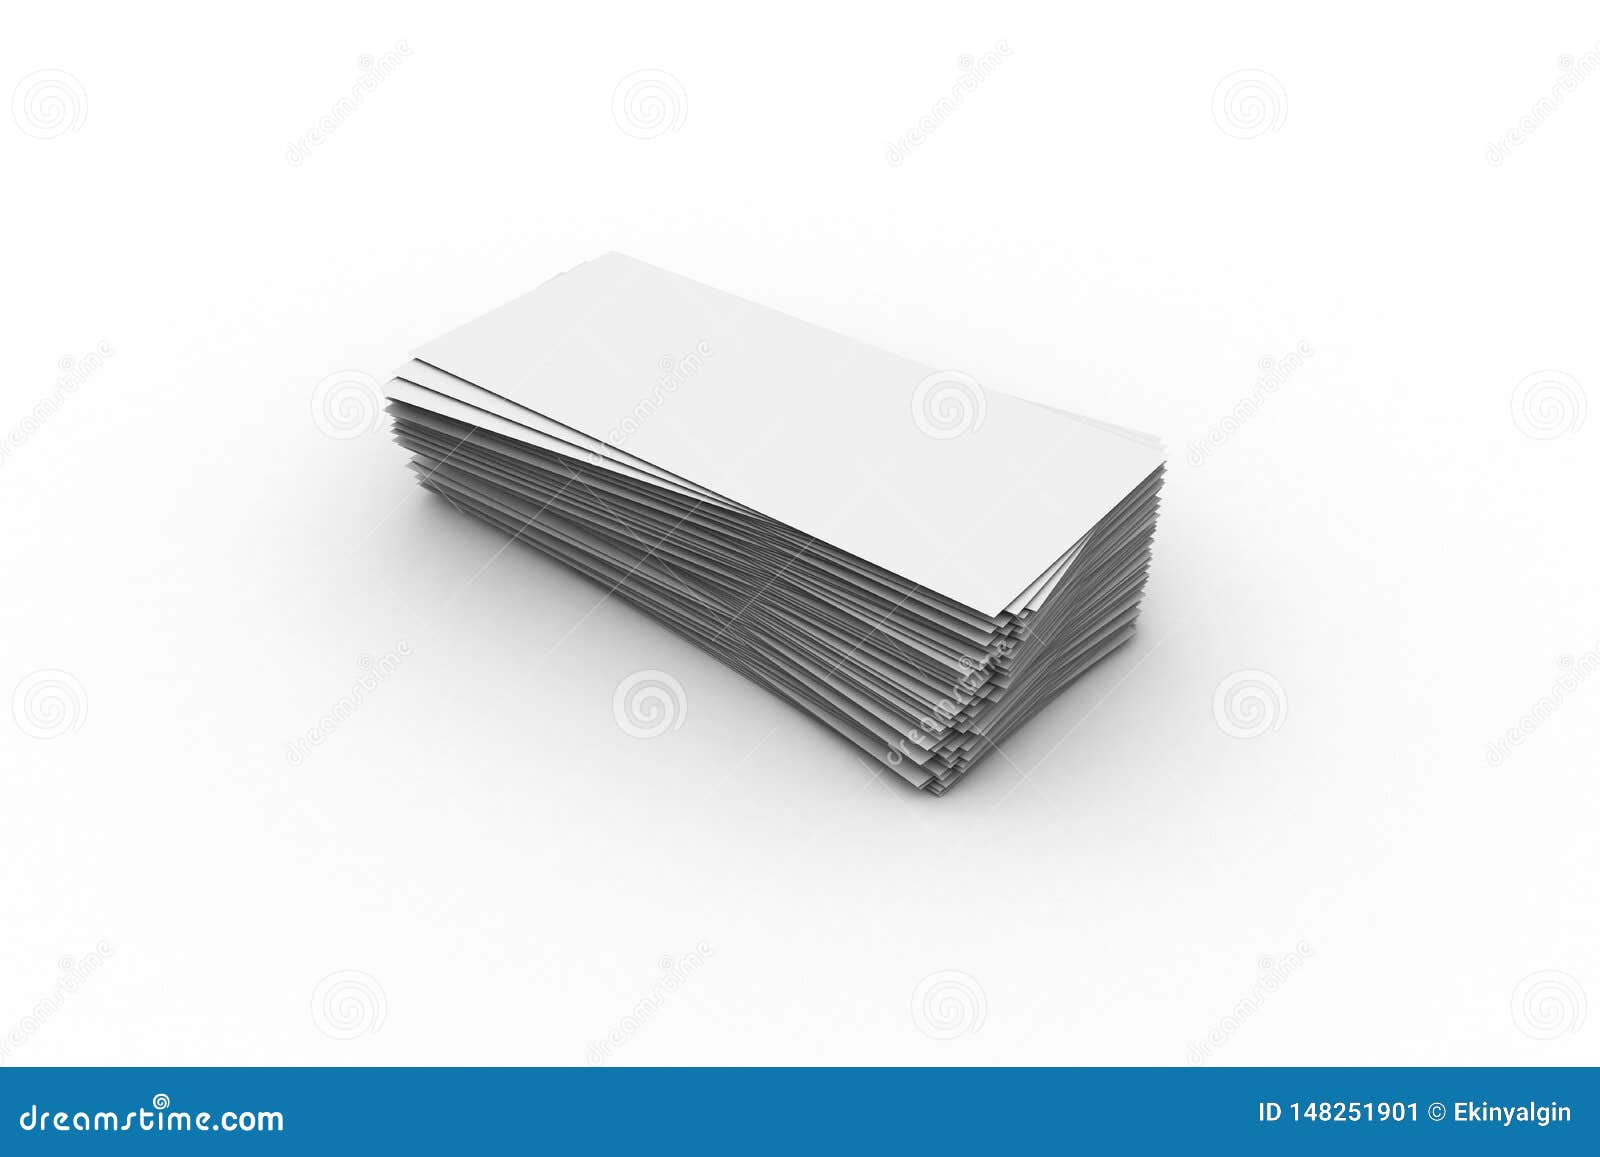 Download Money Banknote Template Mock Up On White Stock ...